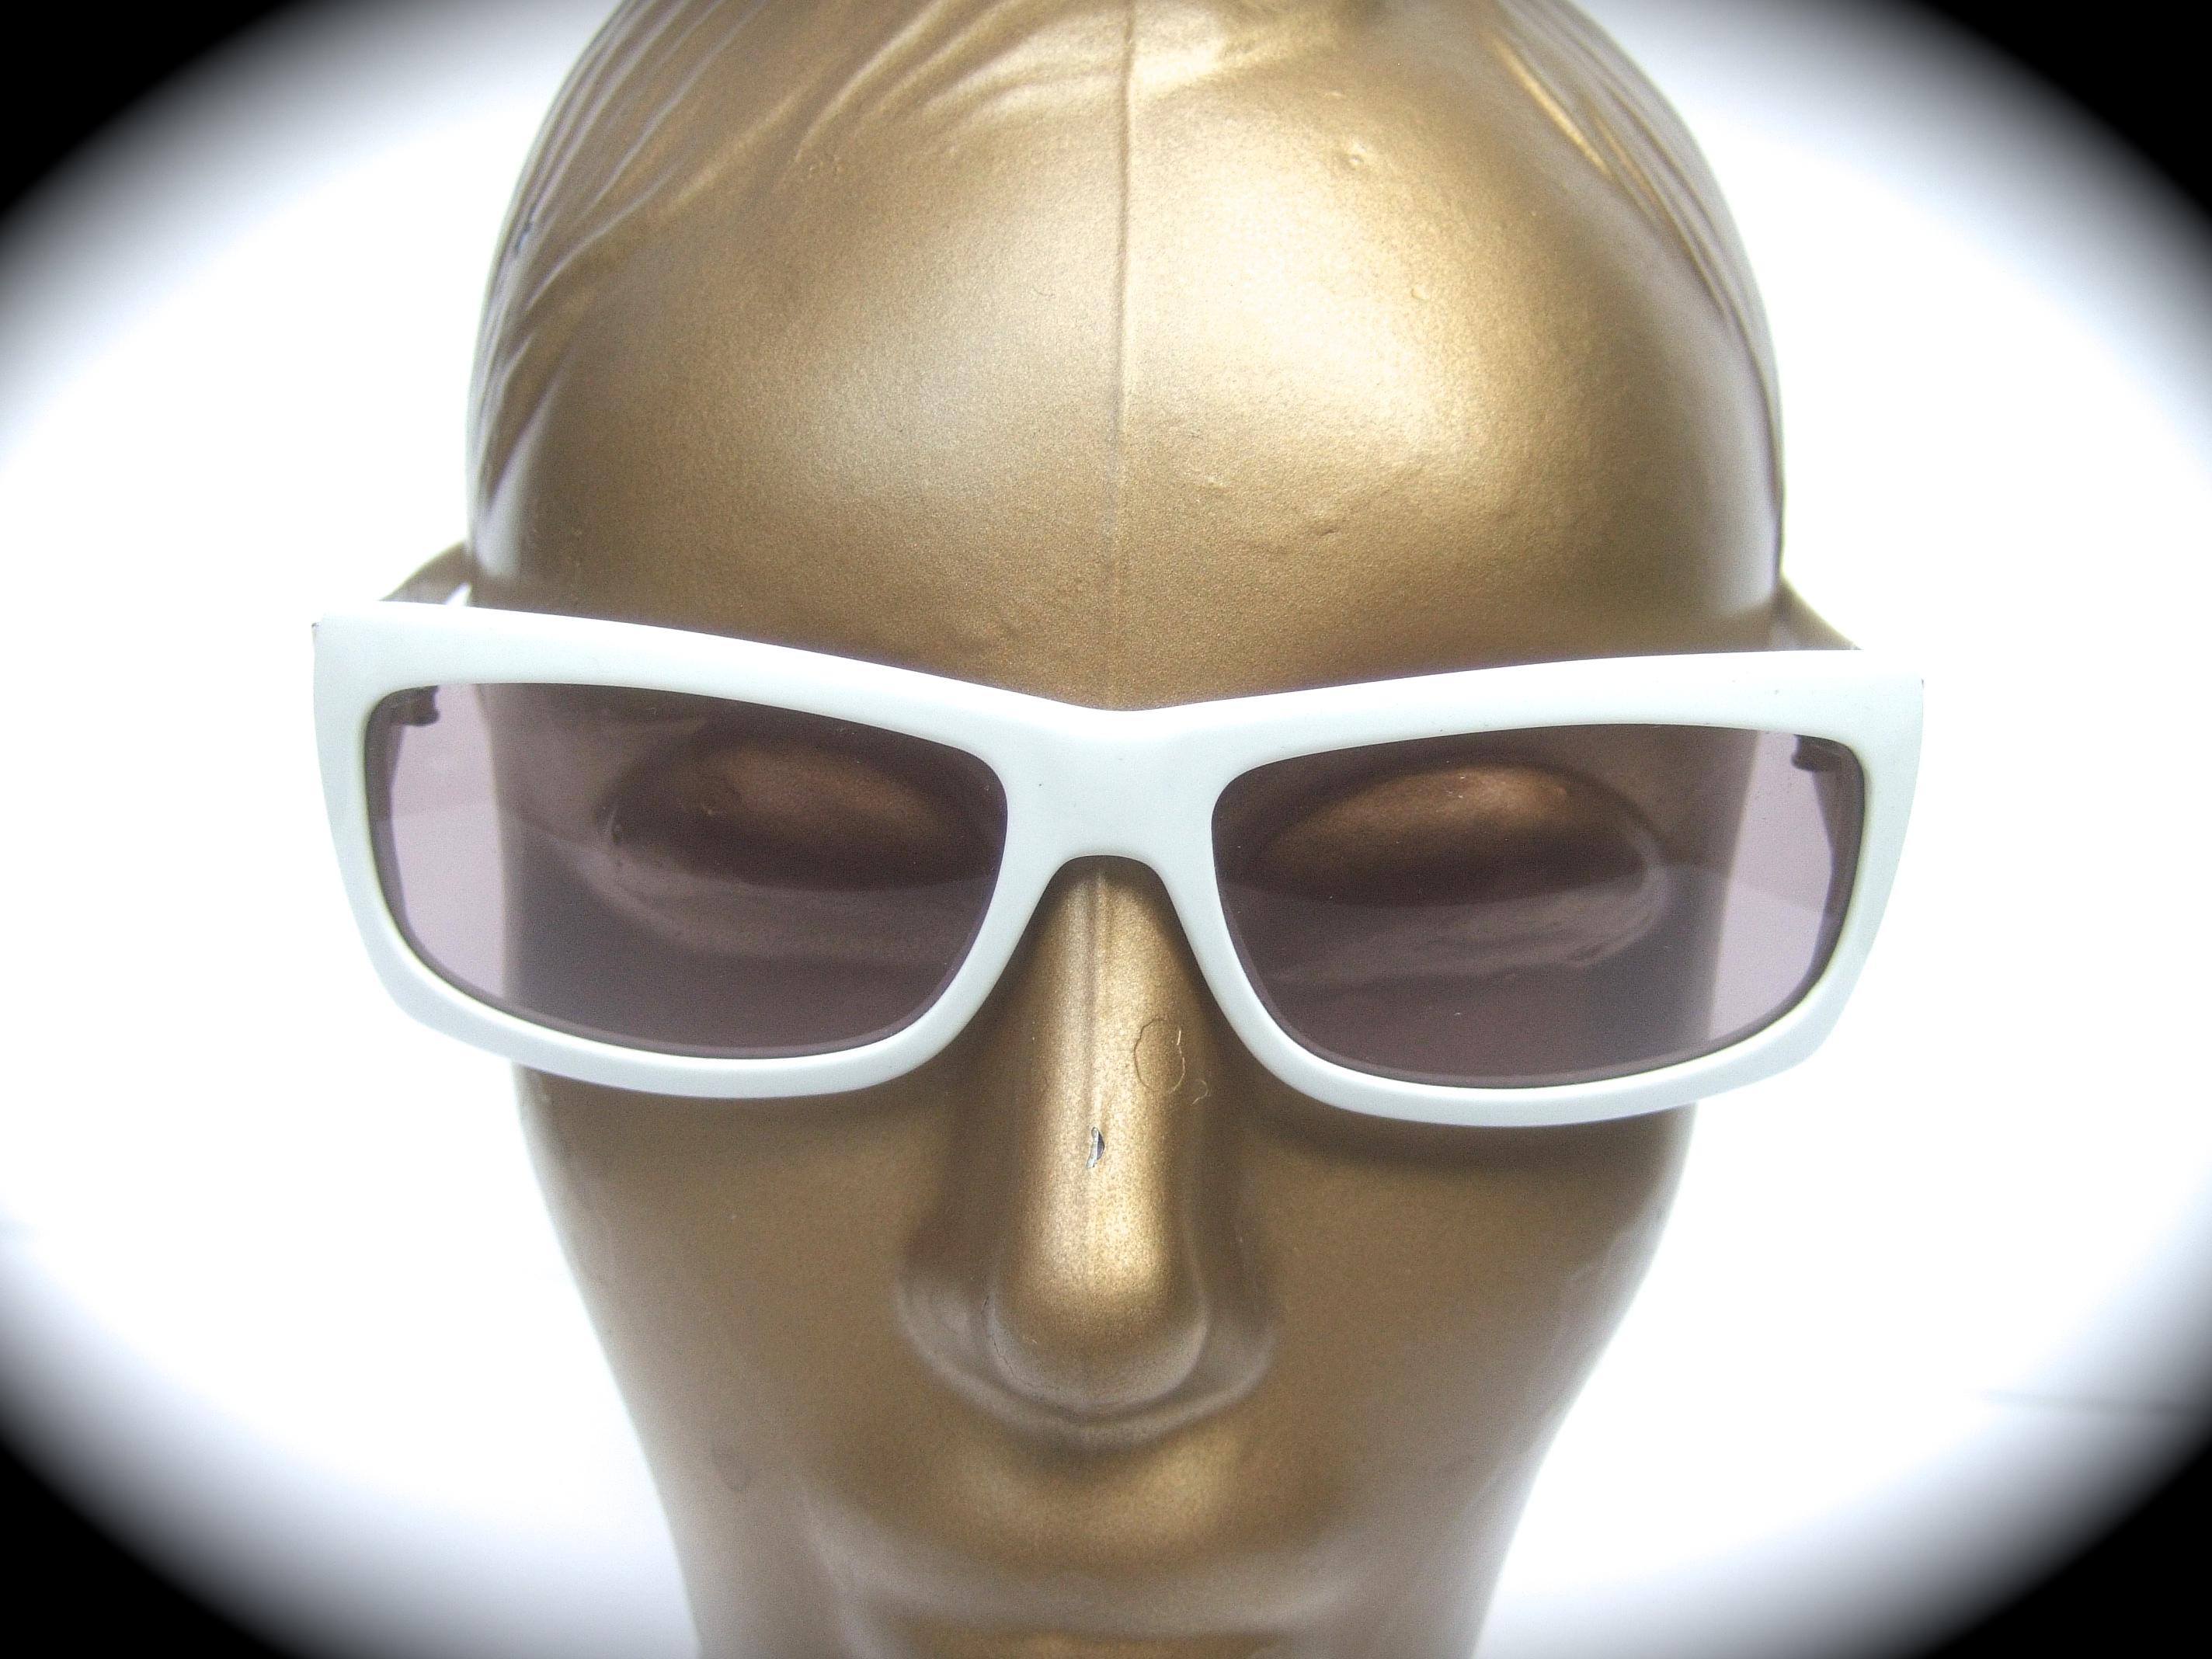 Yves Saint Laurent Chic Italian white plastic frame sunglasses in Y.S.L. case c 1990s
The stylish Italian sunglasses are designed with tinted plastic lenses
Both sides of the white plastic frames are adorned with Saint Laurent's 
iconic Y.S.L.